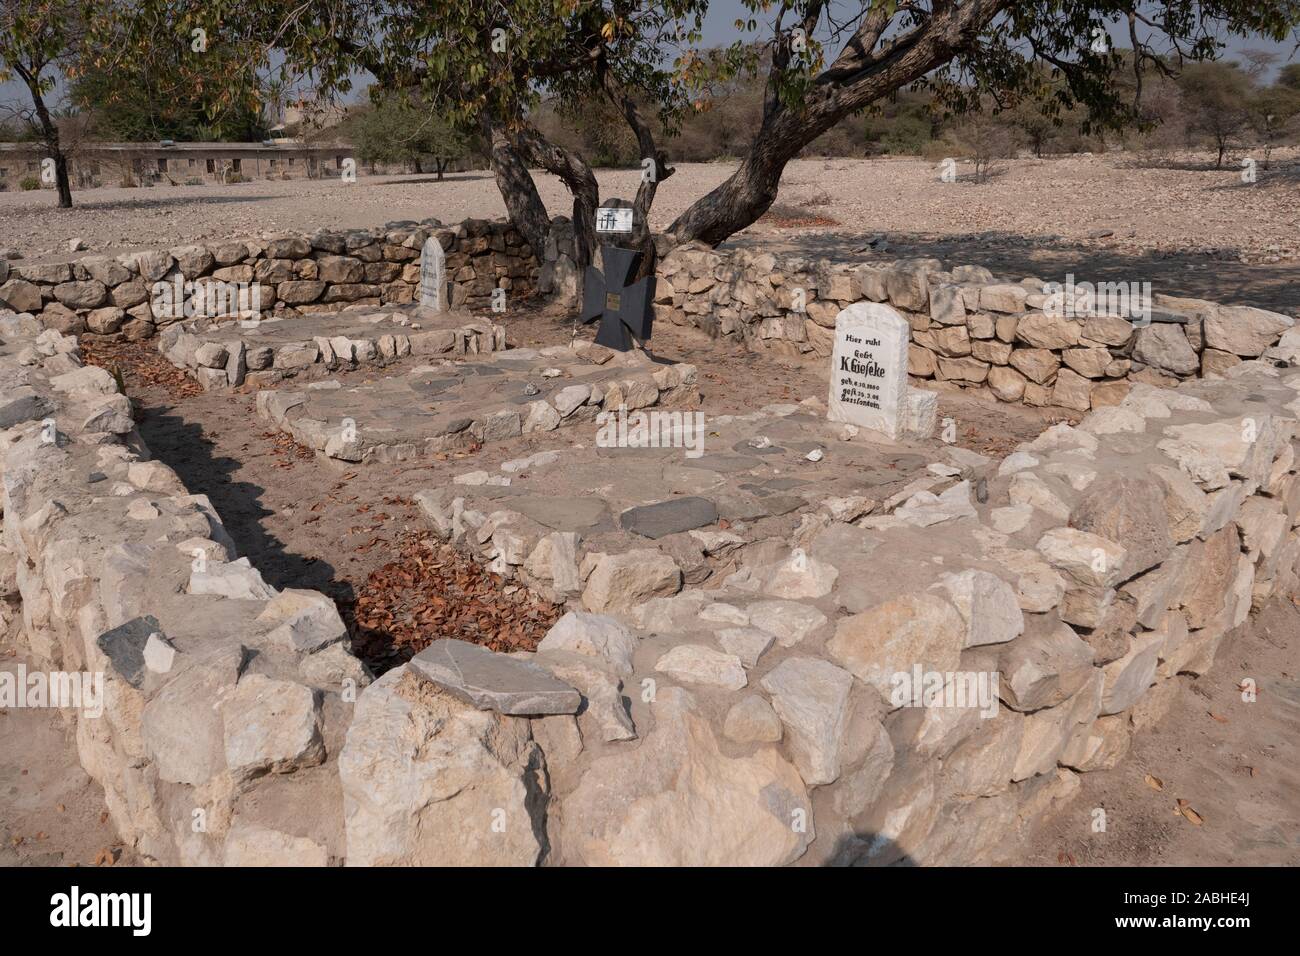 Sesfontein, Kaokoveld, Namibia - July 25 2019: Fort Sesfontein Cemetary with three Graves of soldiers of the German Schutztruppe. Stock Photo